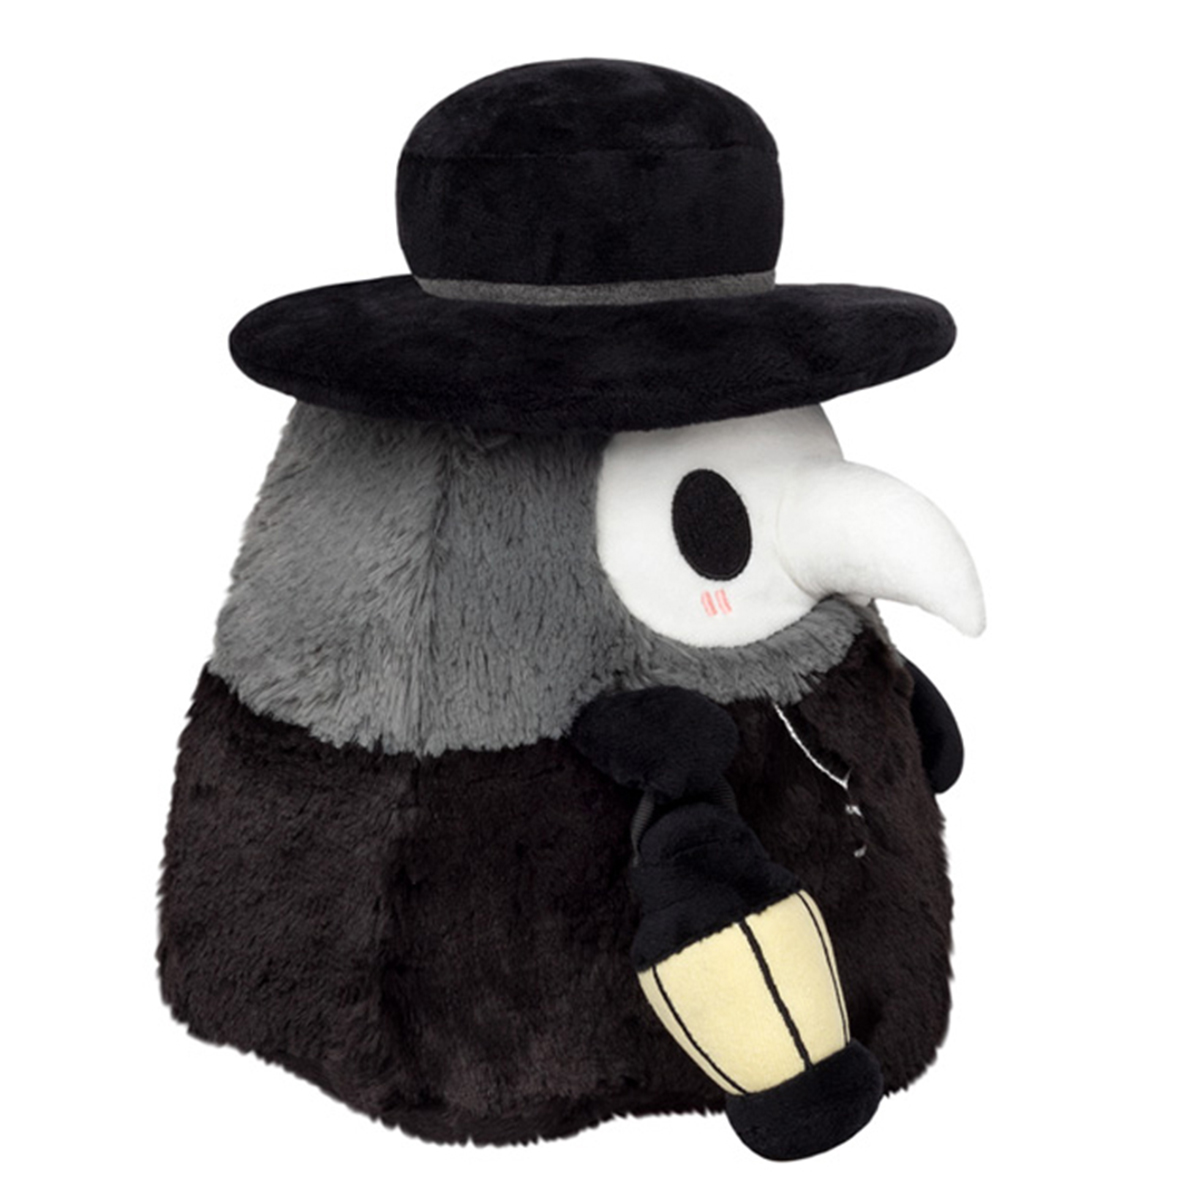 Squishable(R) 7in. Mini Plague Doctor